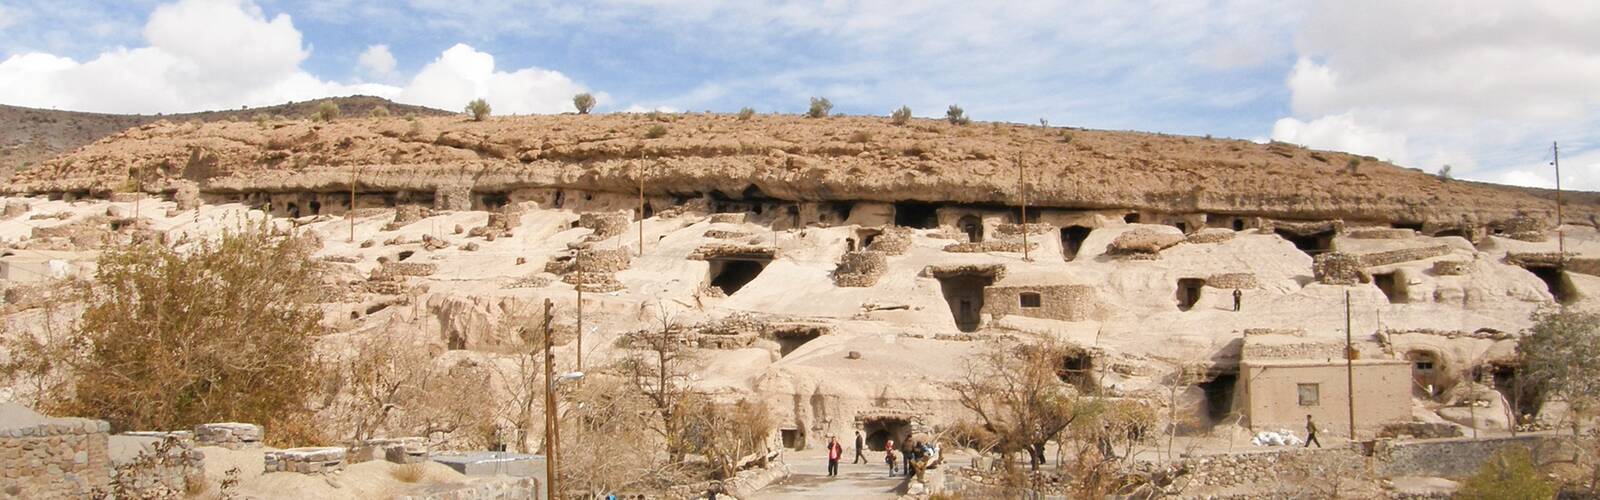 From Kerman to Cultural Landscape of Maymand